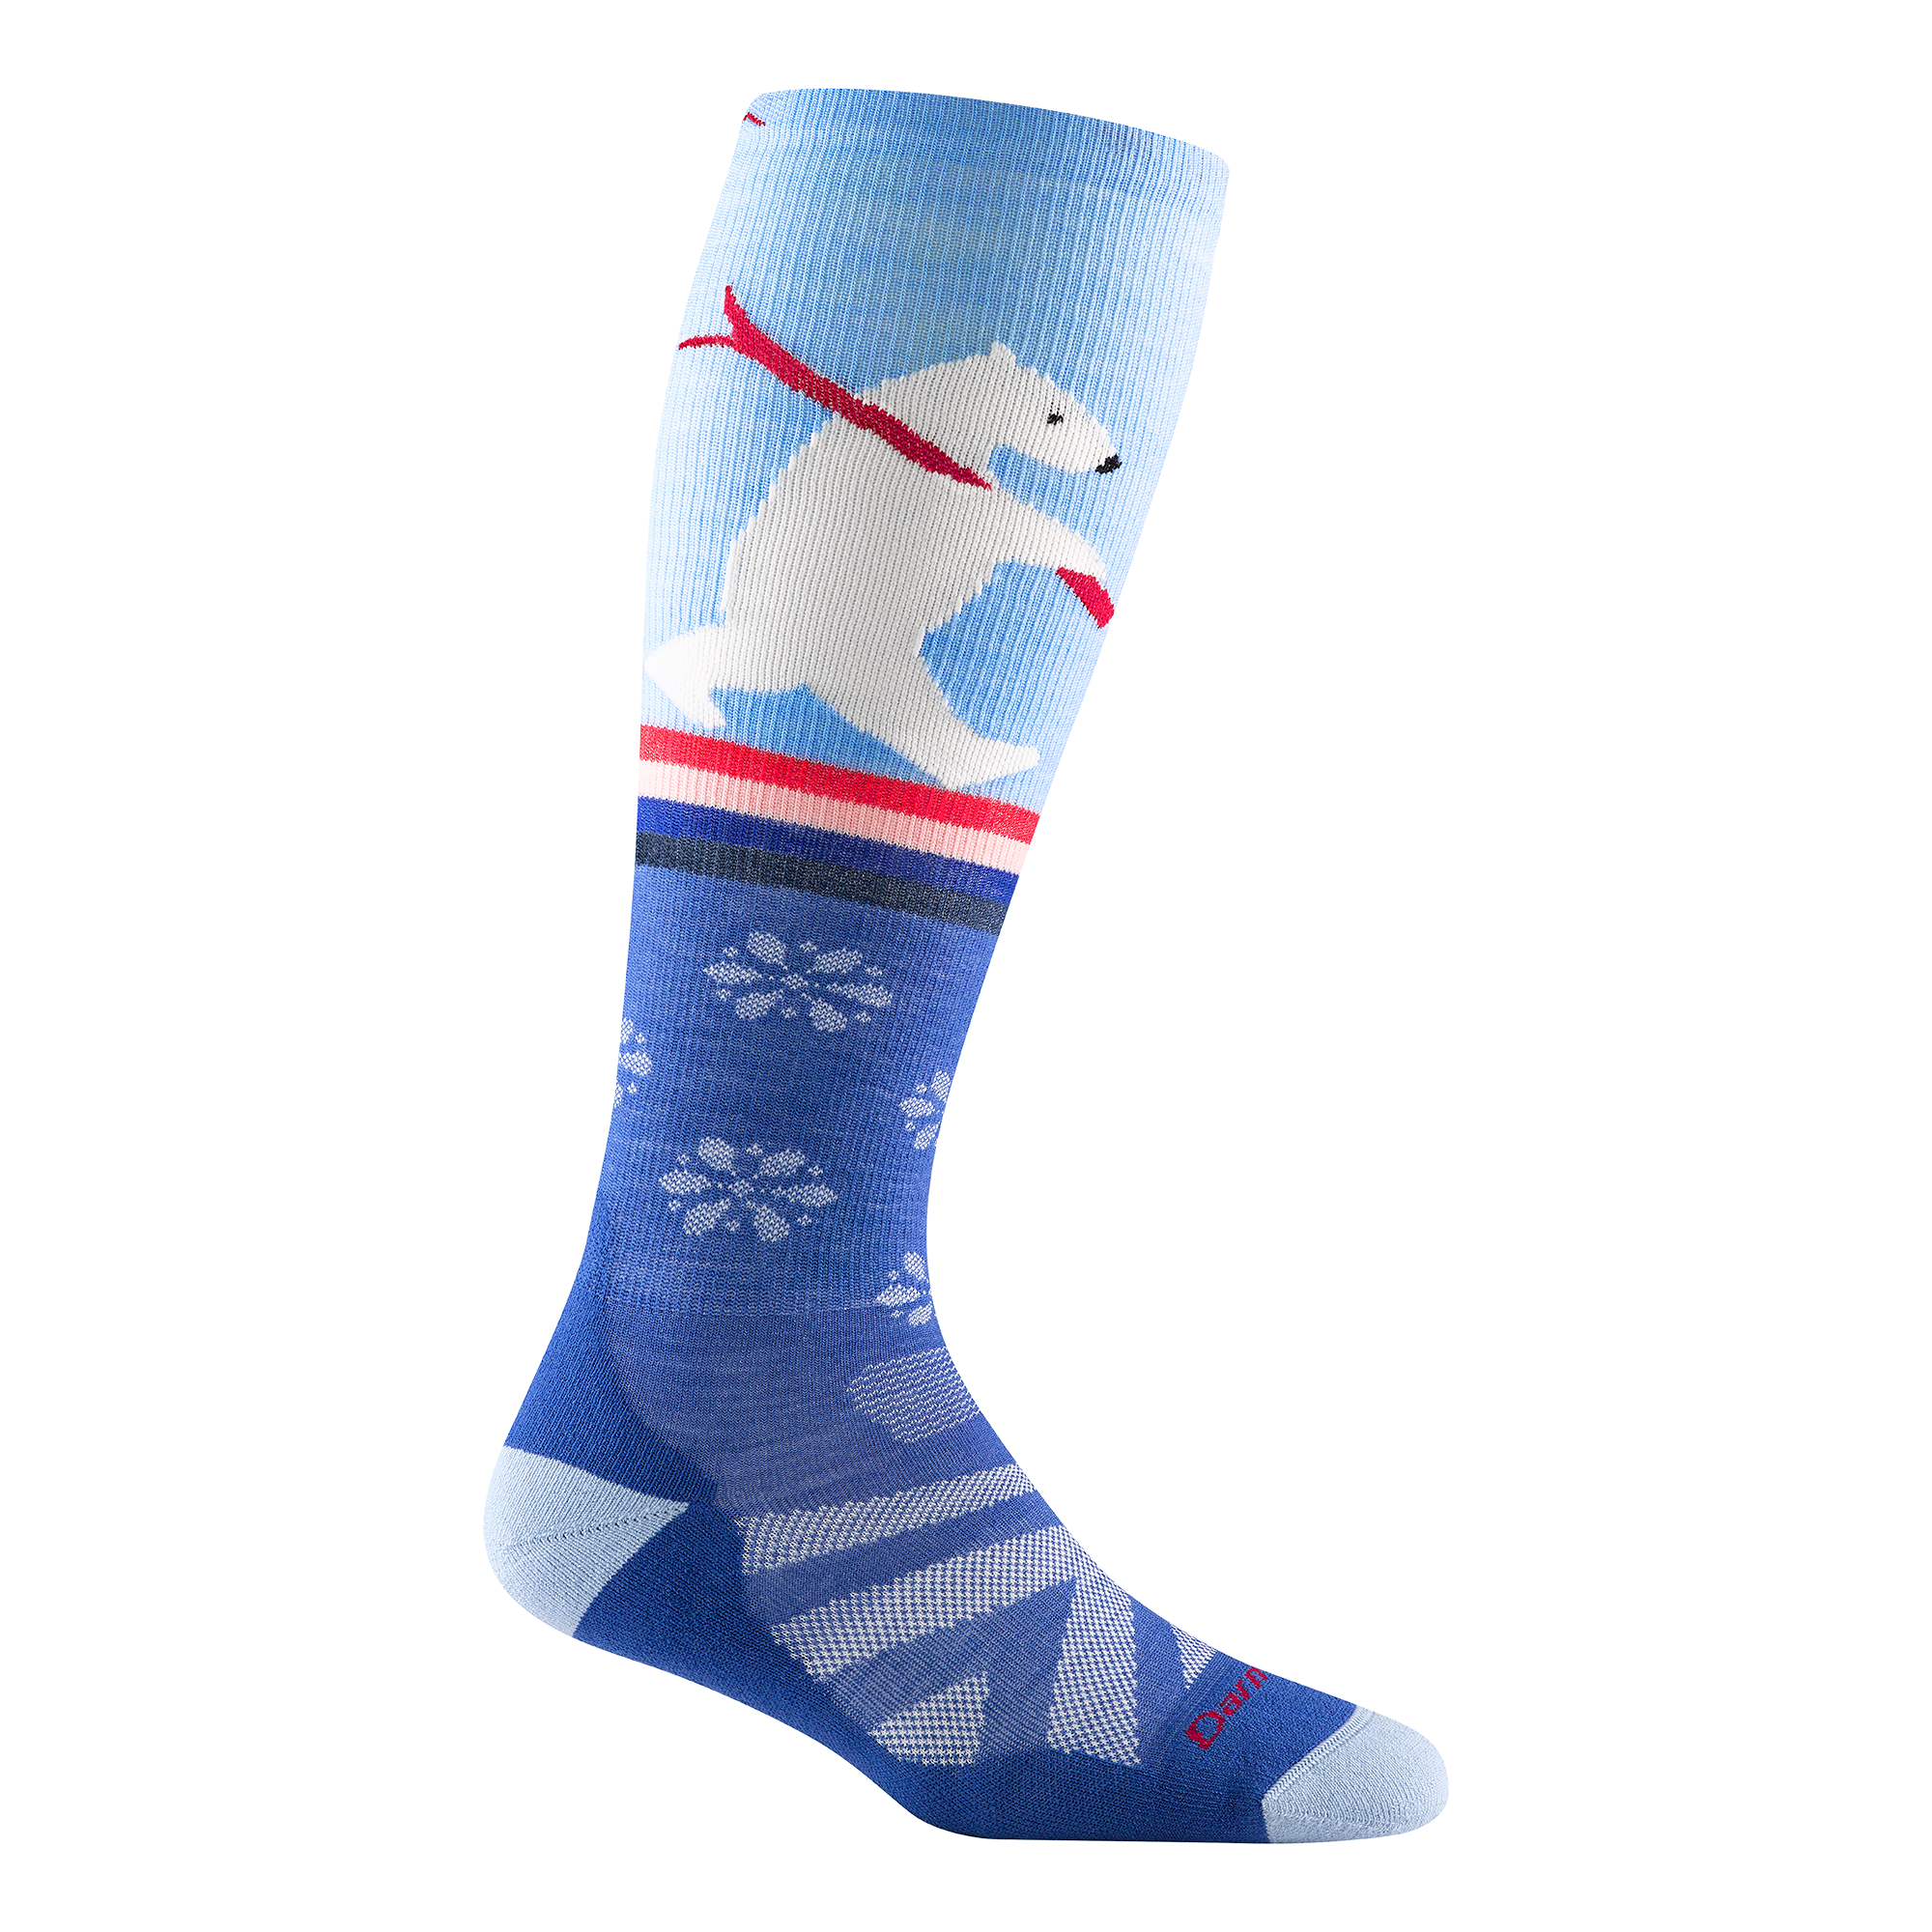 8025 women's due north over-the-calf ski sock in stellar blue with light blue accents and white polar bear design